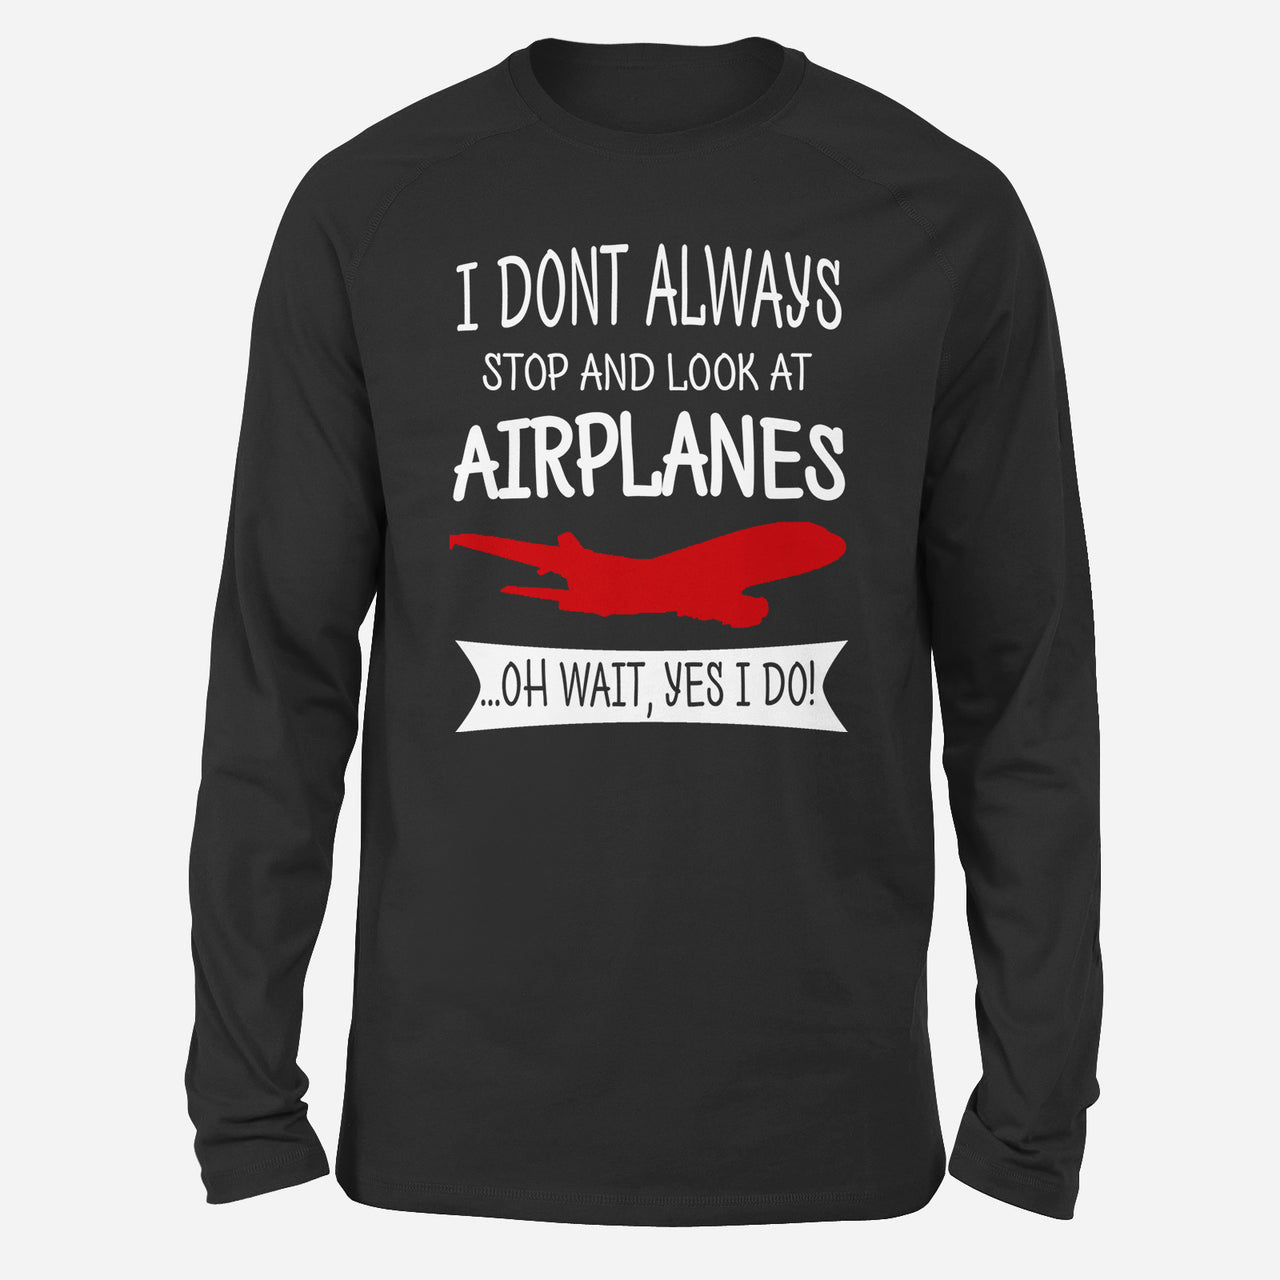 I Don't Always Stop and Look at Airplanes Designed Long-Sleeve T-Shirts